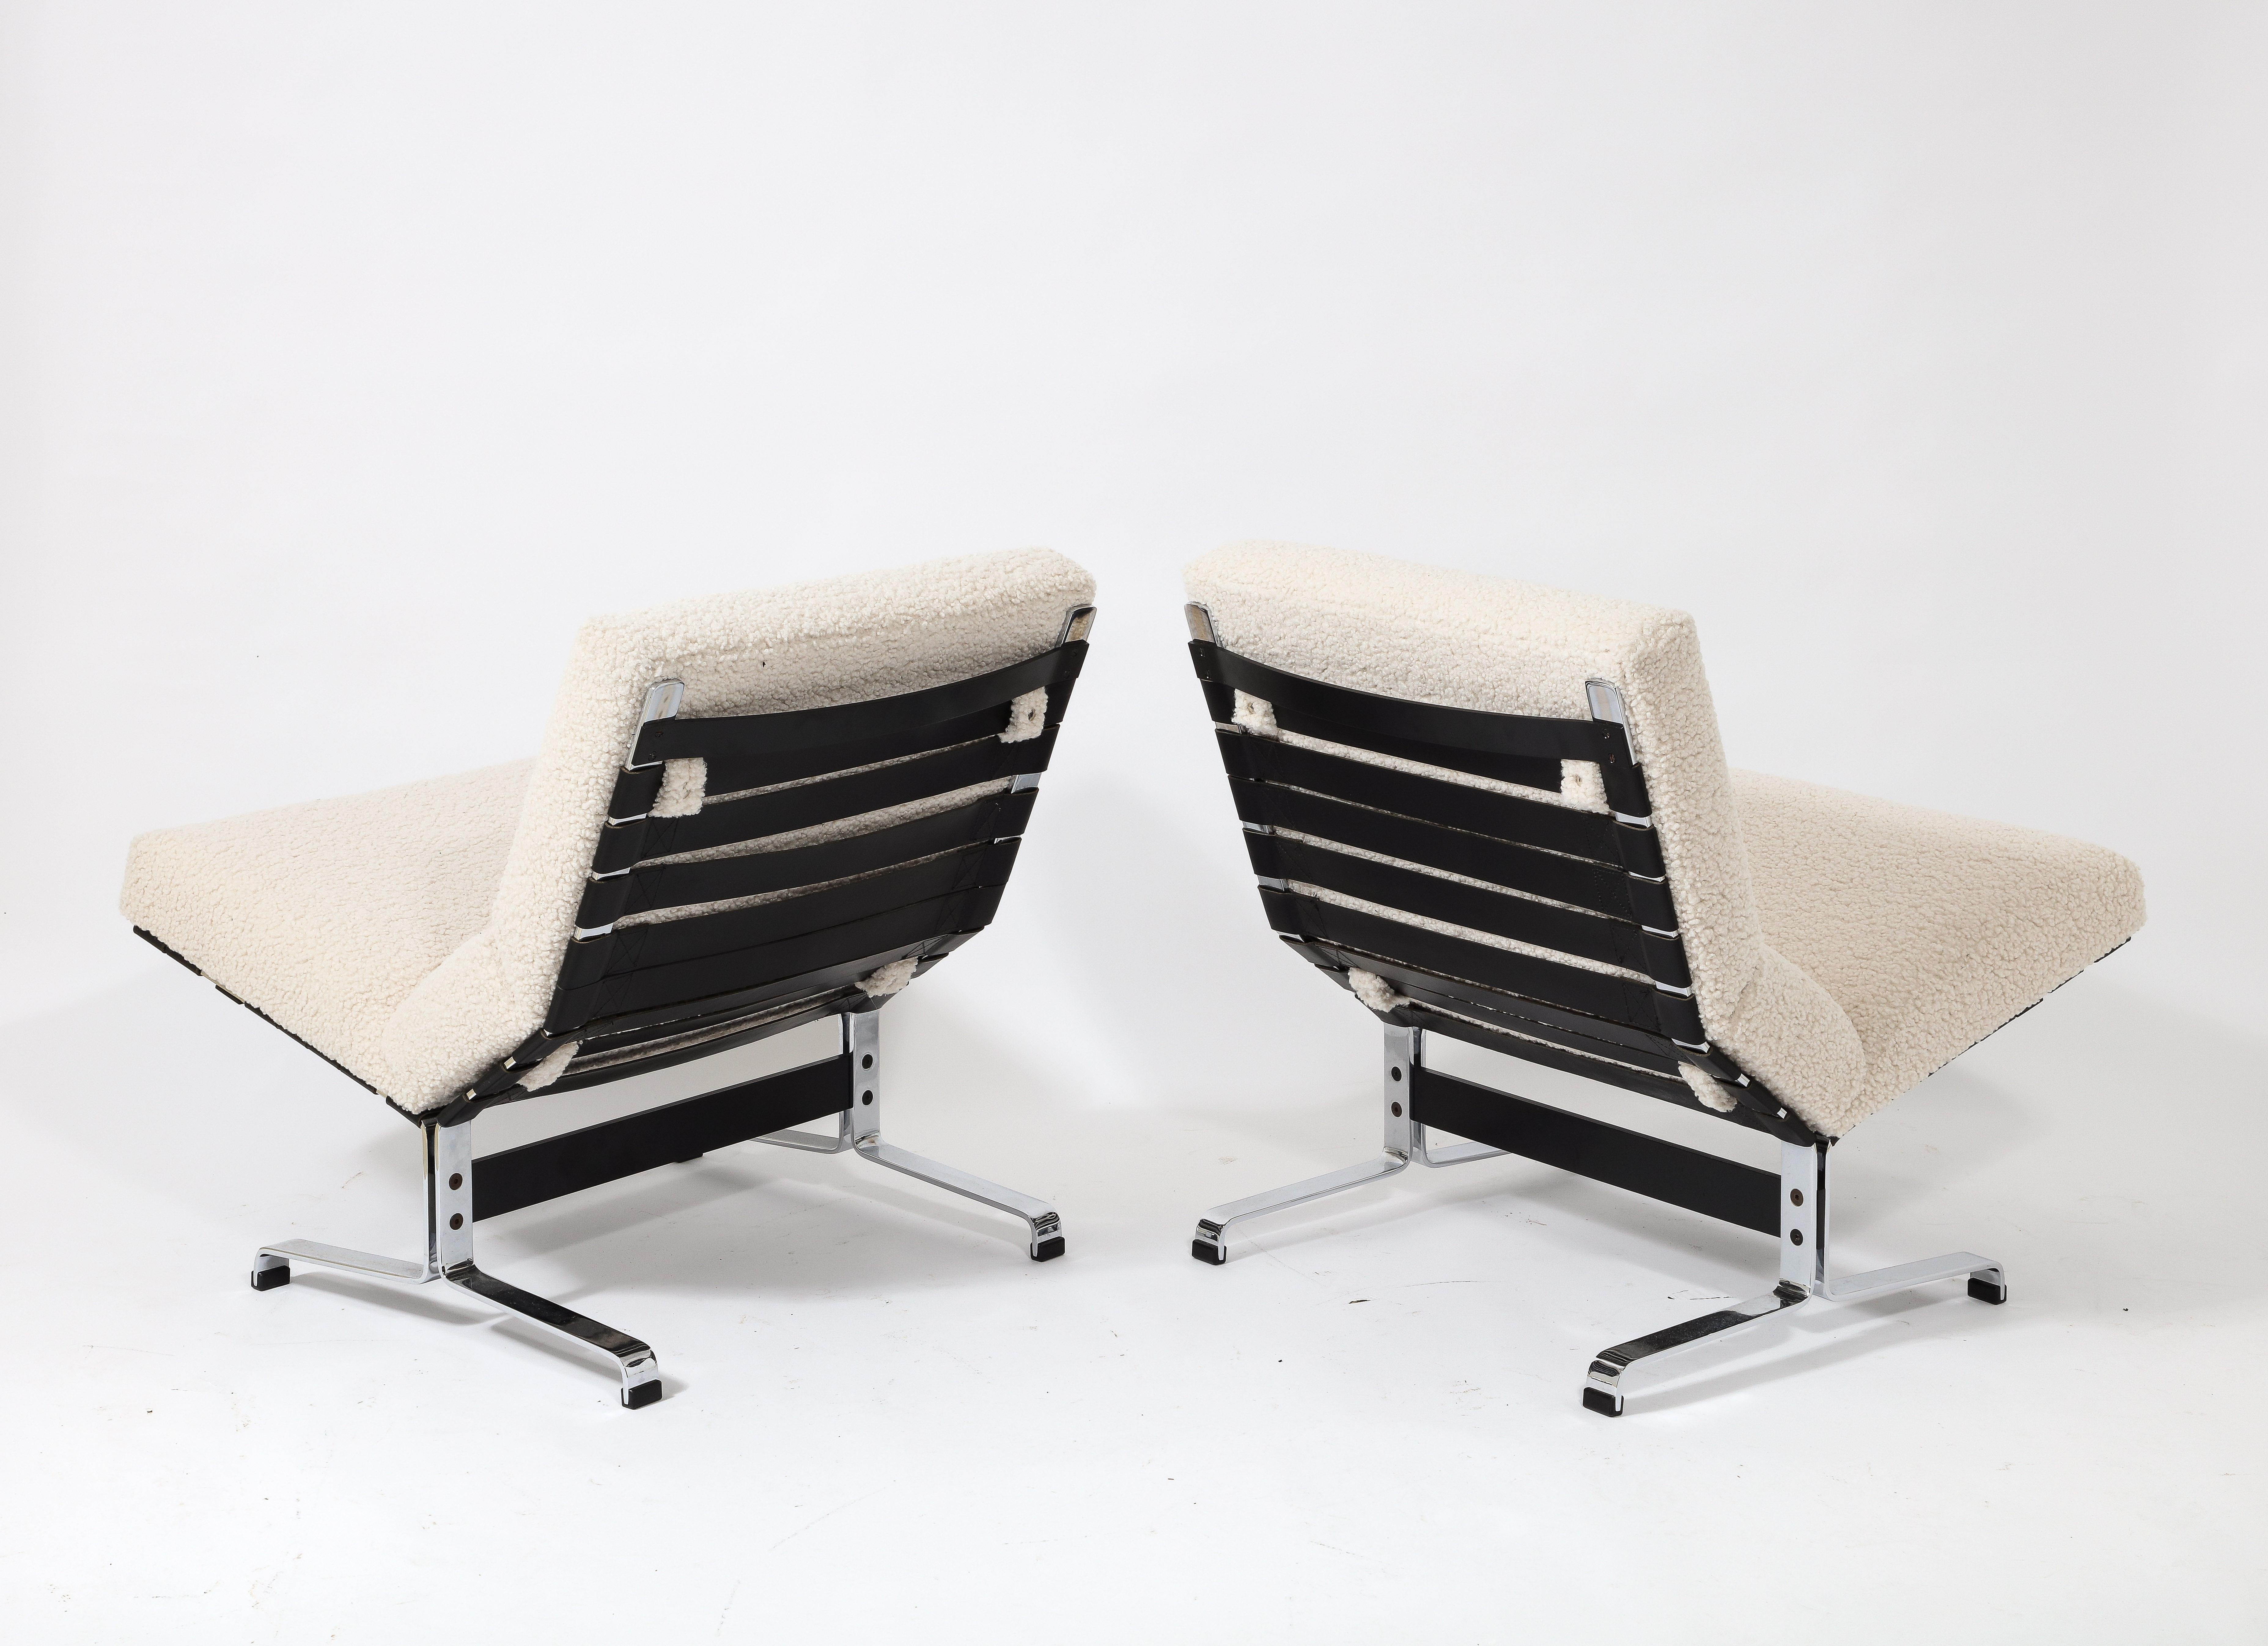 Etienne Fermigier Pair of Slipper Lounge Chairs in Cream, France 1960's For Sale 4